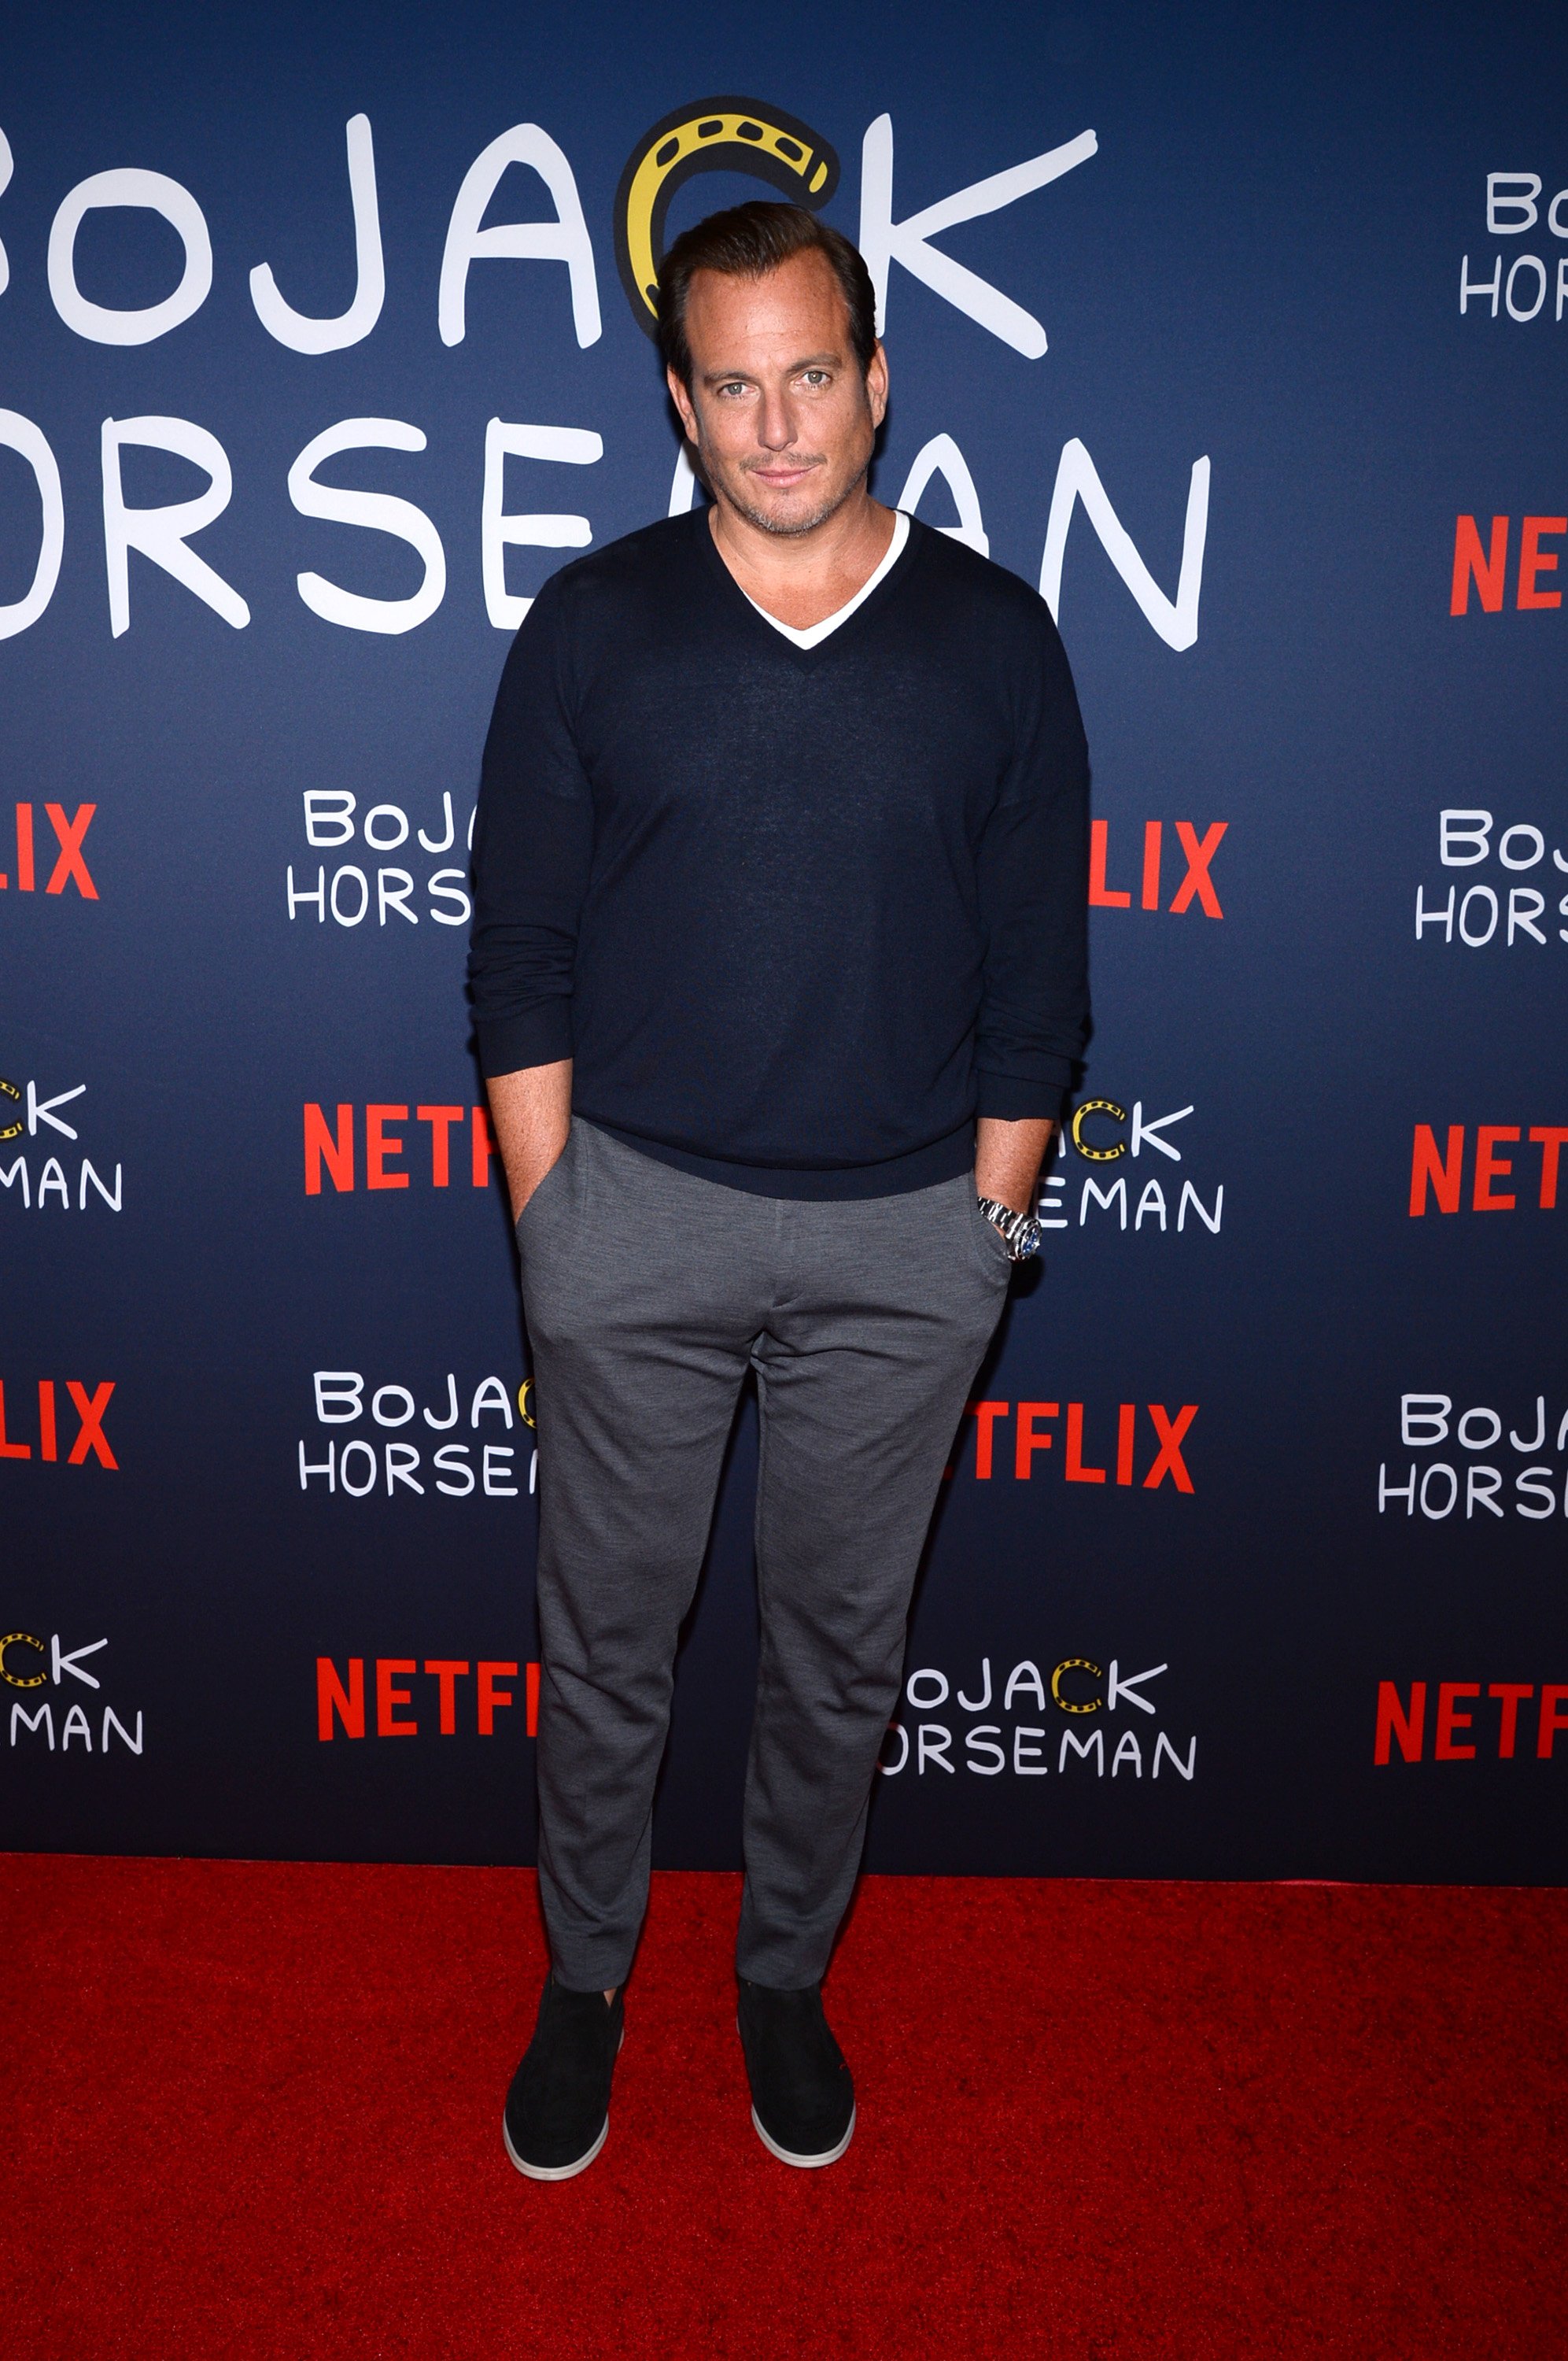 Will Arnett at the premiere of season 6 of "Bojack Horseman" on January 30, 2020, in California. | Source: Getty Images